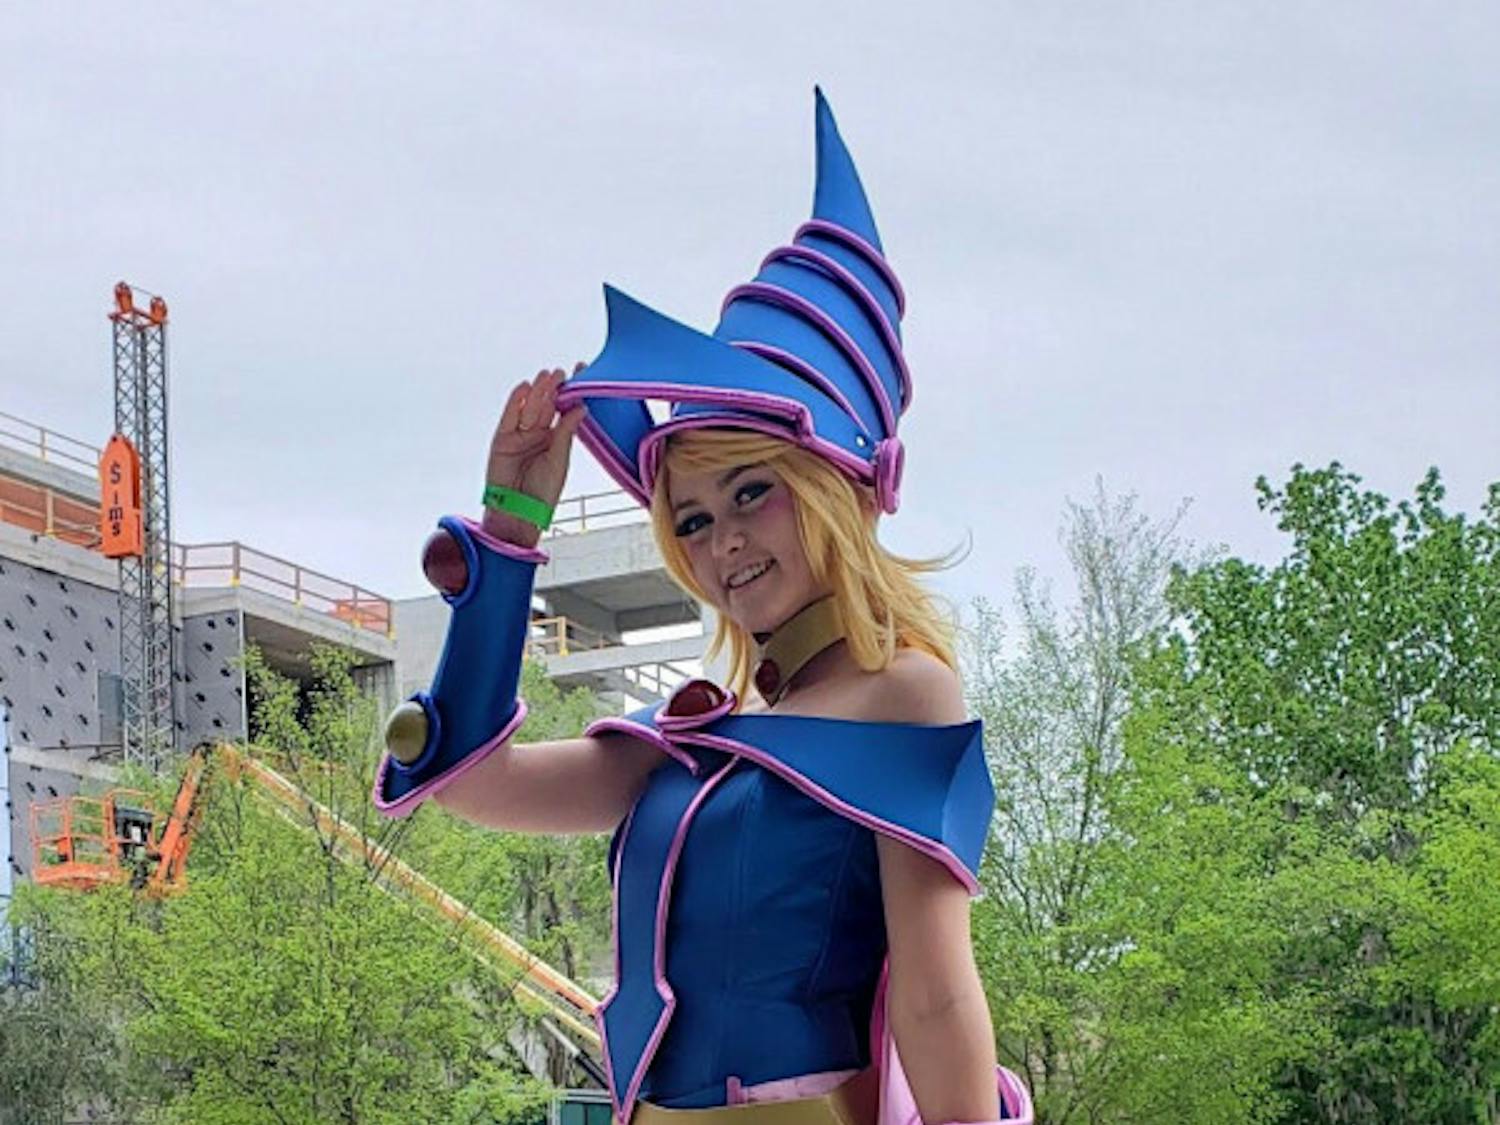 Dark Magician Girl
Gabby Guinn, 20, came from Vero Beach, Florida, to attend SwampCon and show off her cosplay as Dark Magician Girl from the popular anime, “Yu-Gi-Oh!” According to Guinn, the cosplay took a month and a half to complete and is mostly made out of foam and glittery fabric.
“Cosplay who you love,” she advises first-time cosplayers. “Whoever you cosplay, make sure you do it because you love the character.”
&nbsp;